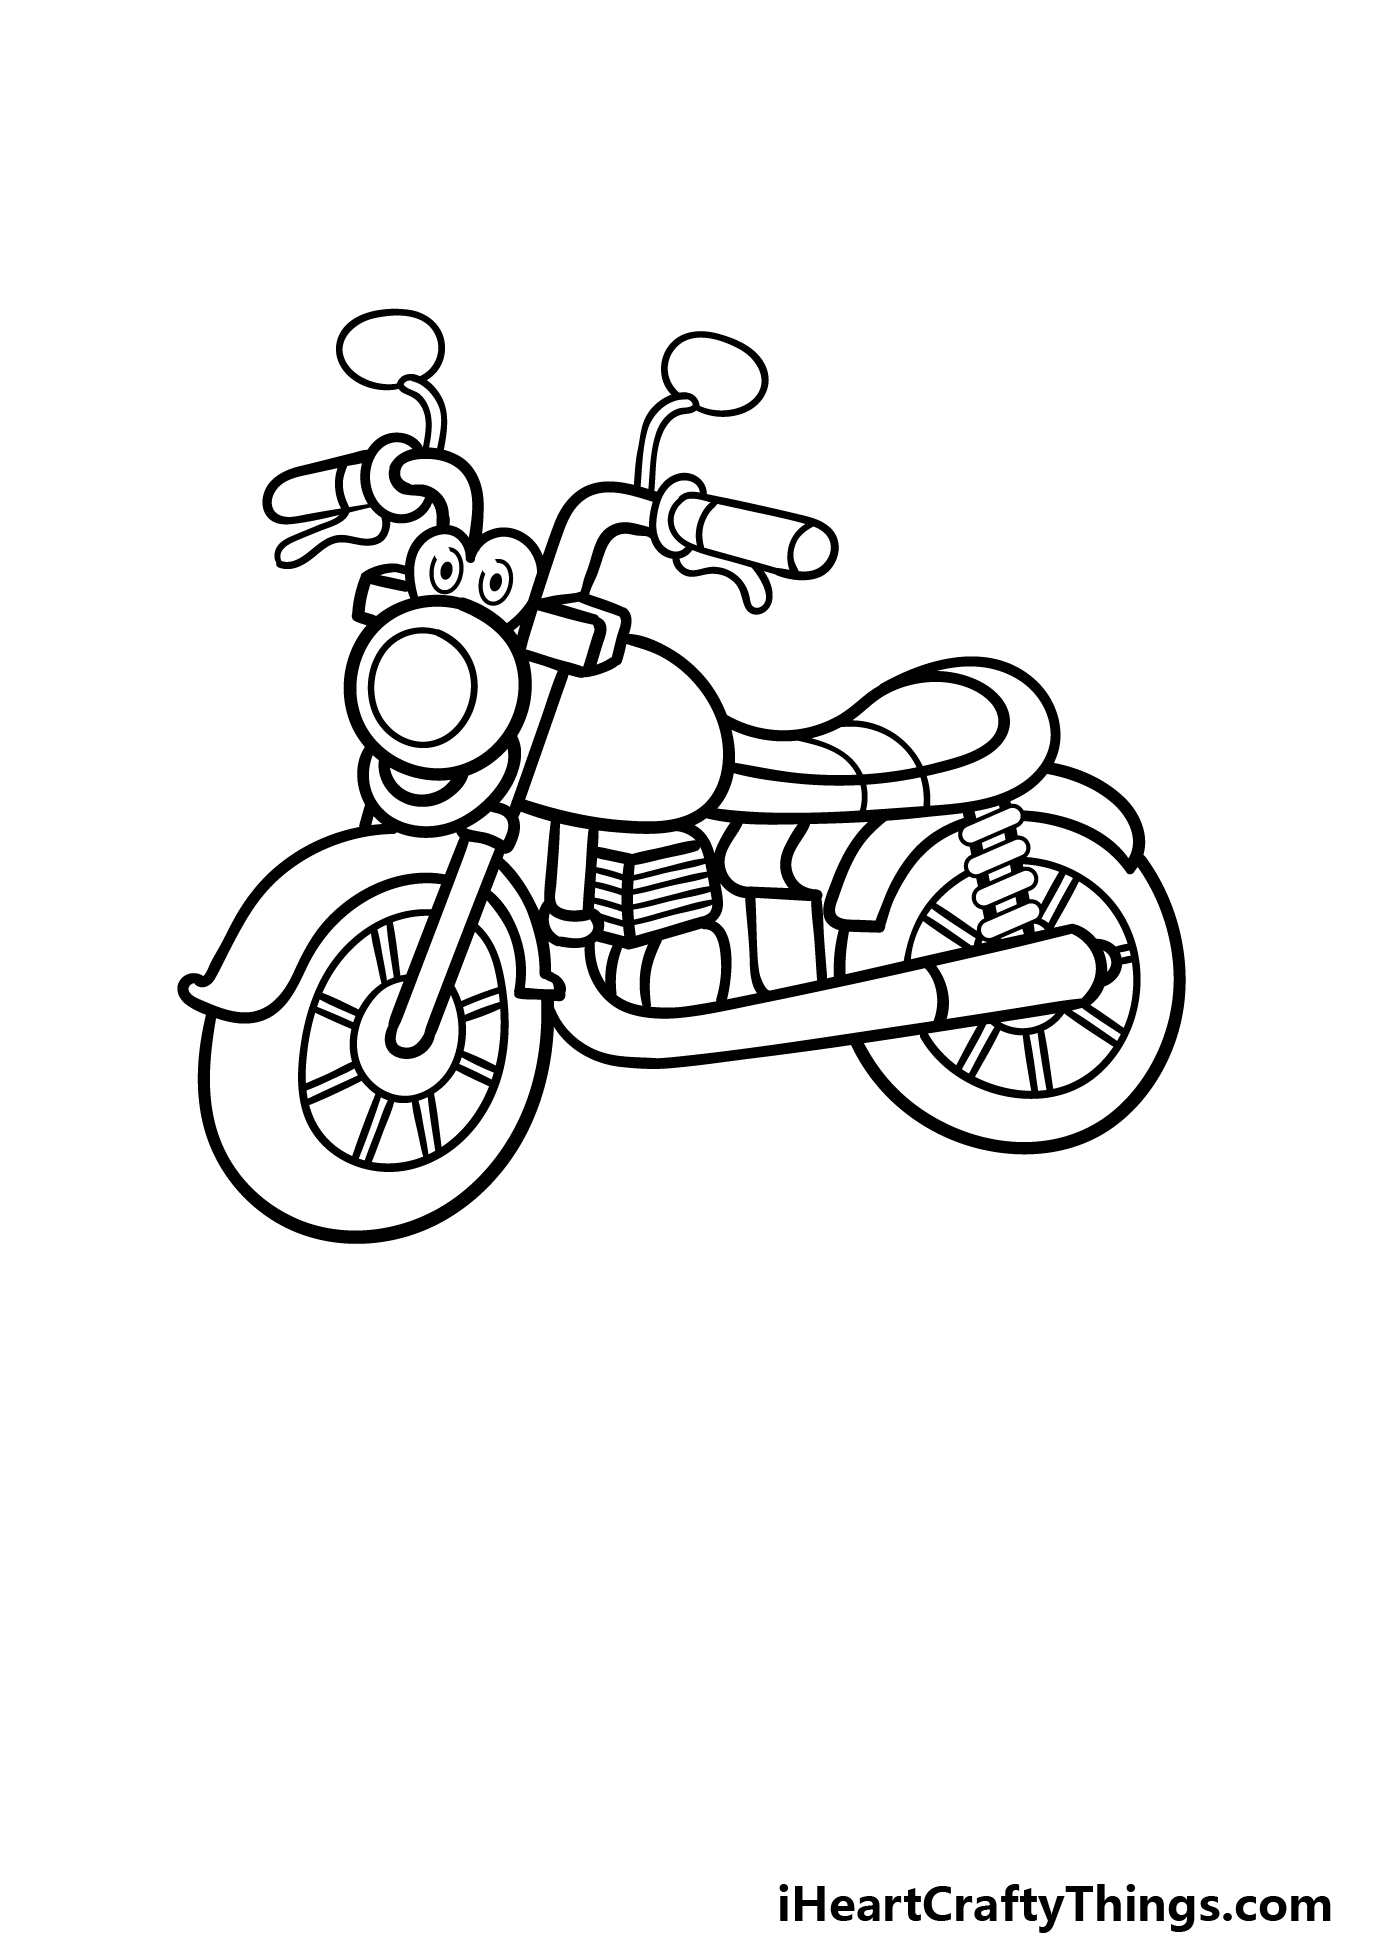 how to draw a cartoon motorcycle step 7